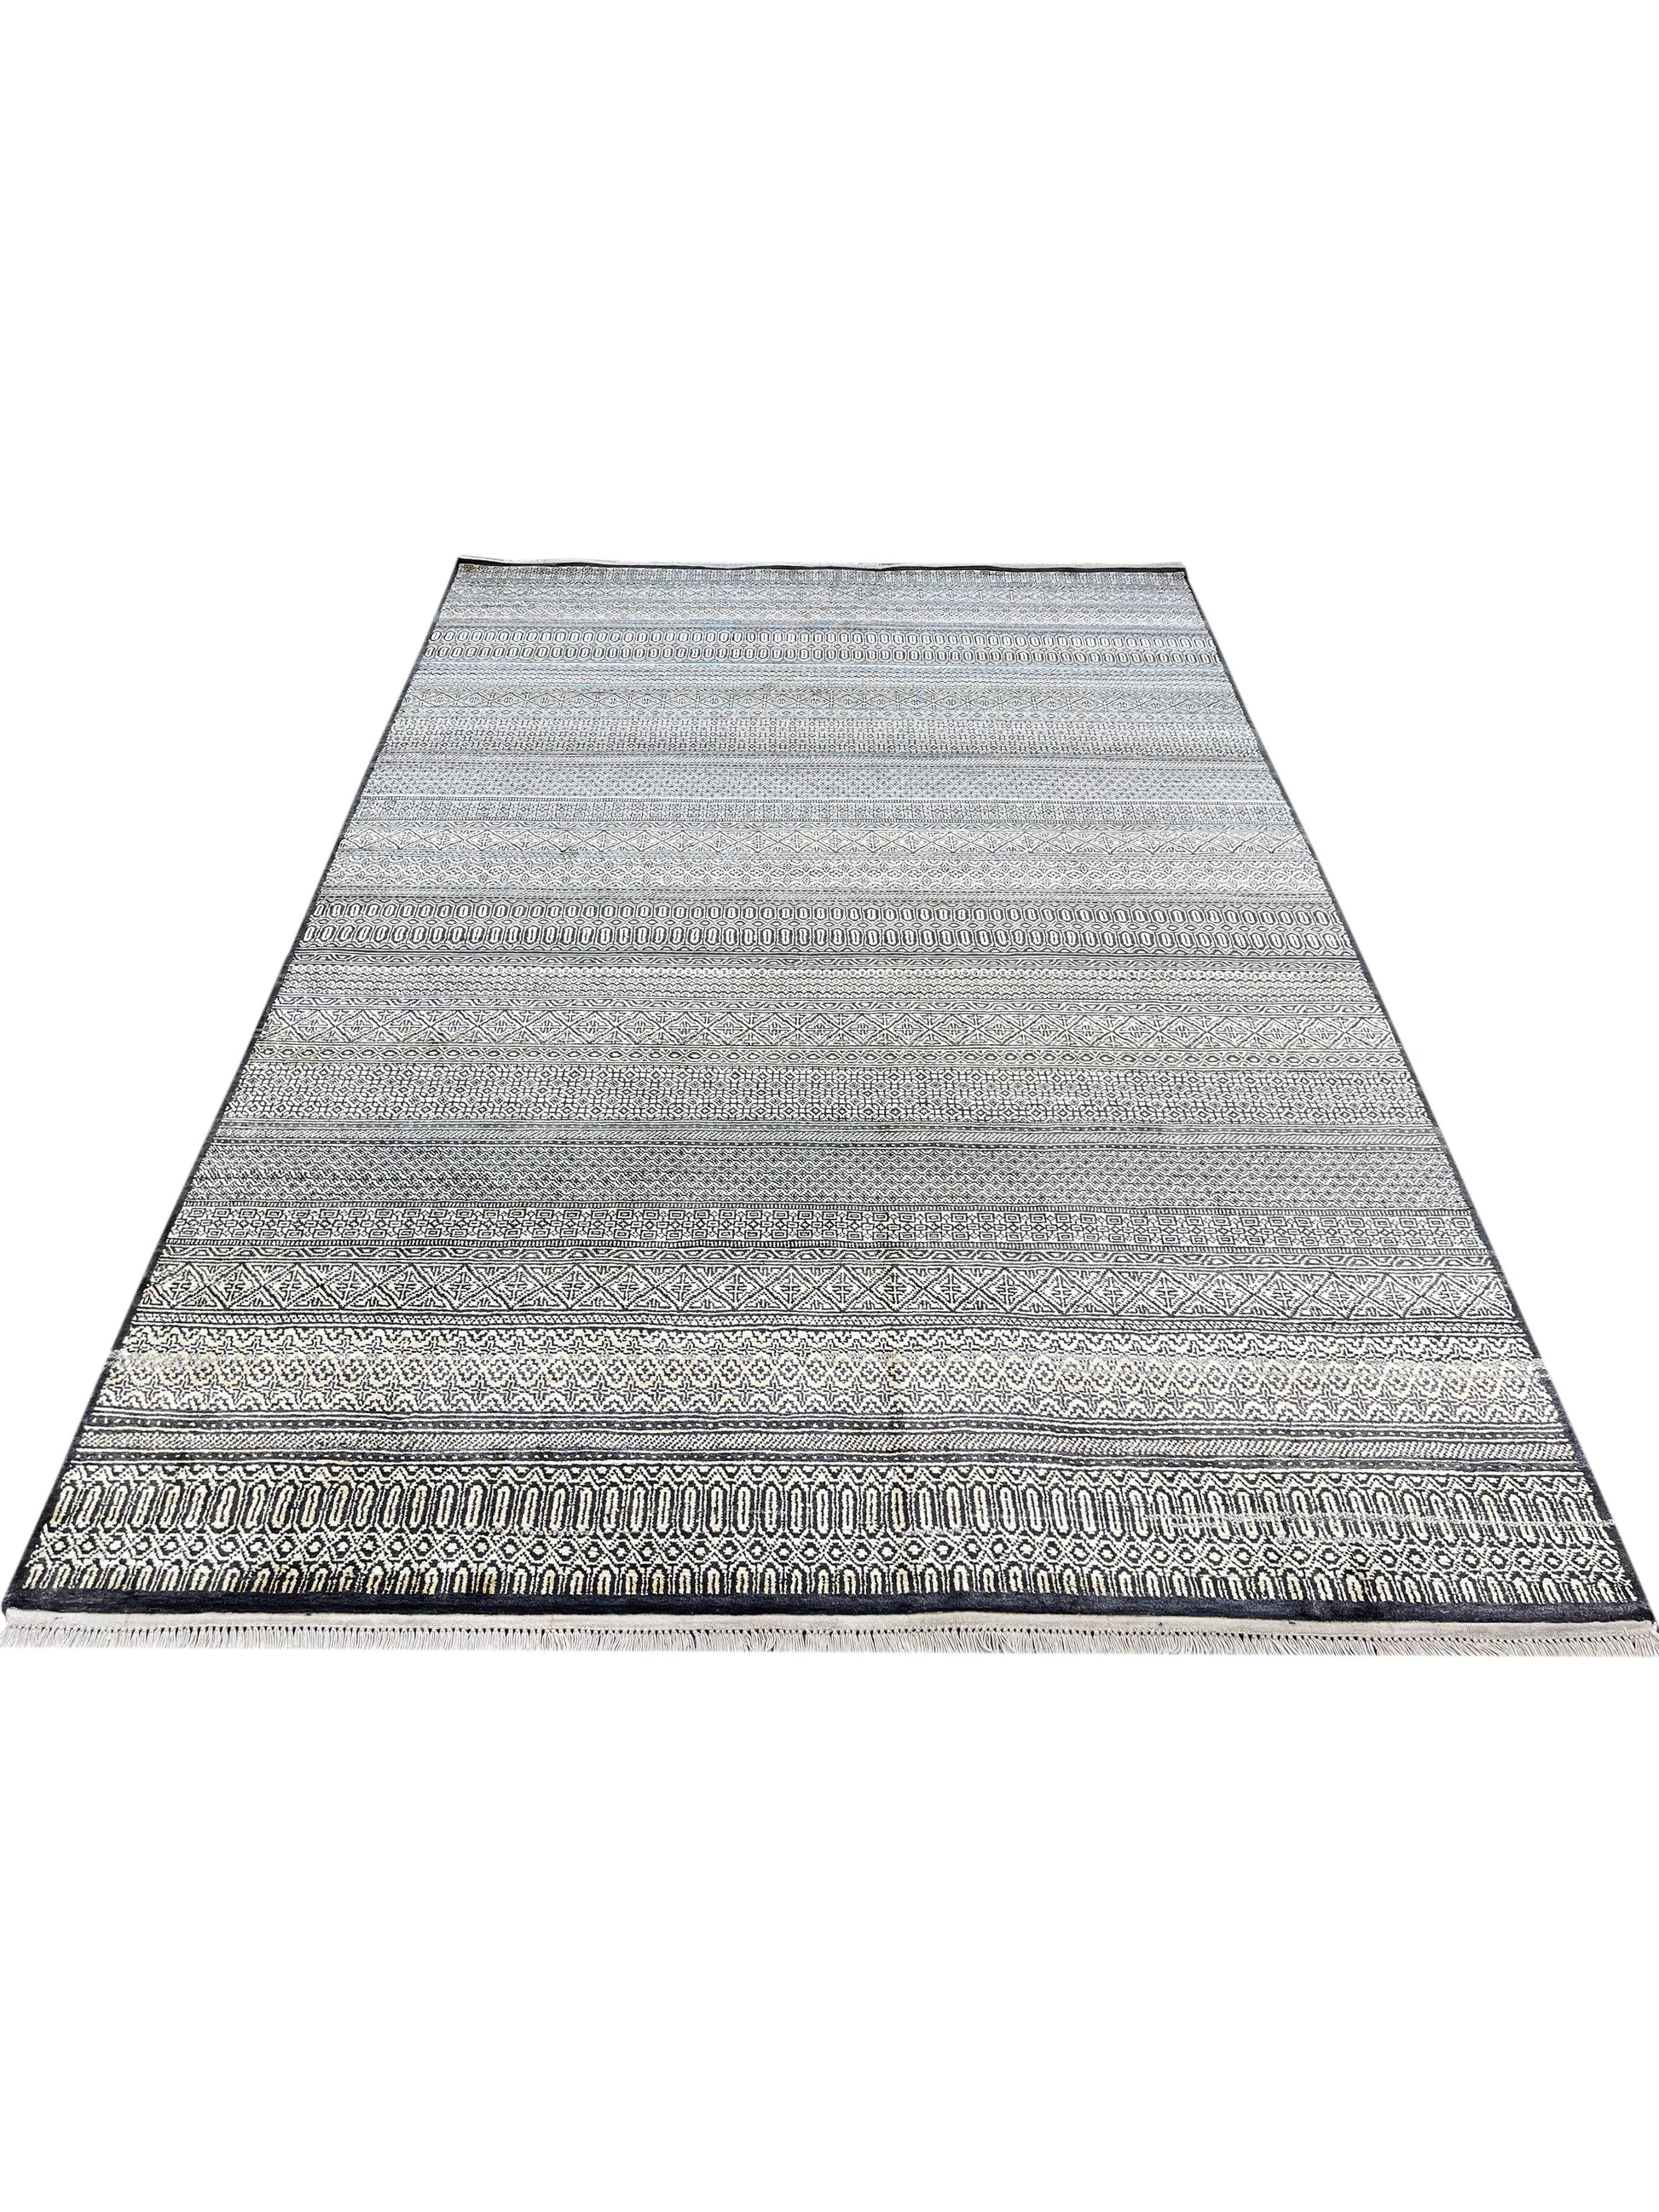 Get trendy with Grey and Ivory Pure Silk Modern Handknotted Area Rug 6.1x9.3ft 185X281Cms - Modern Rugs available at Jaipur Oriental Rugs. Grab yours for $4050.00 today!